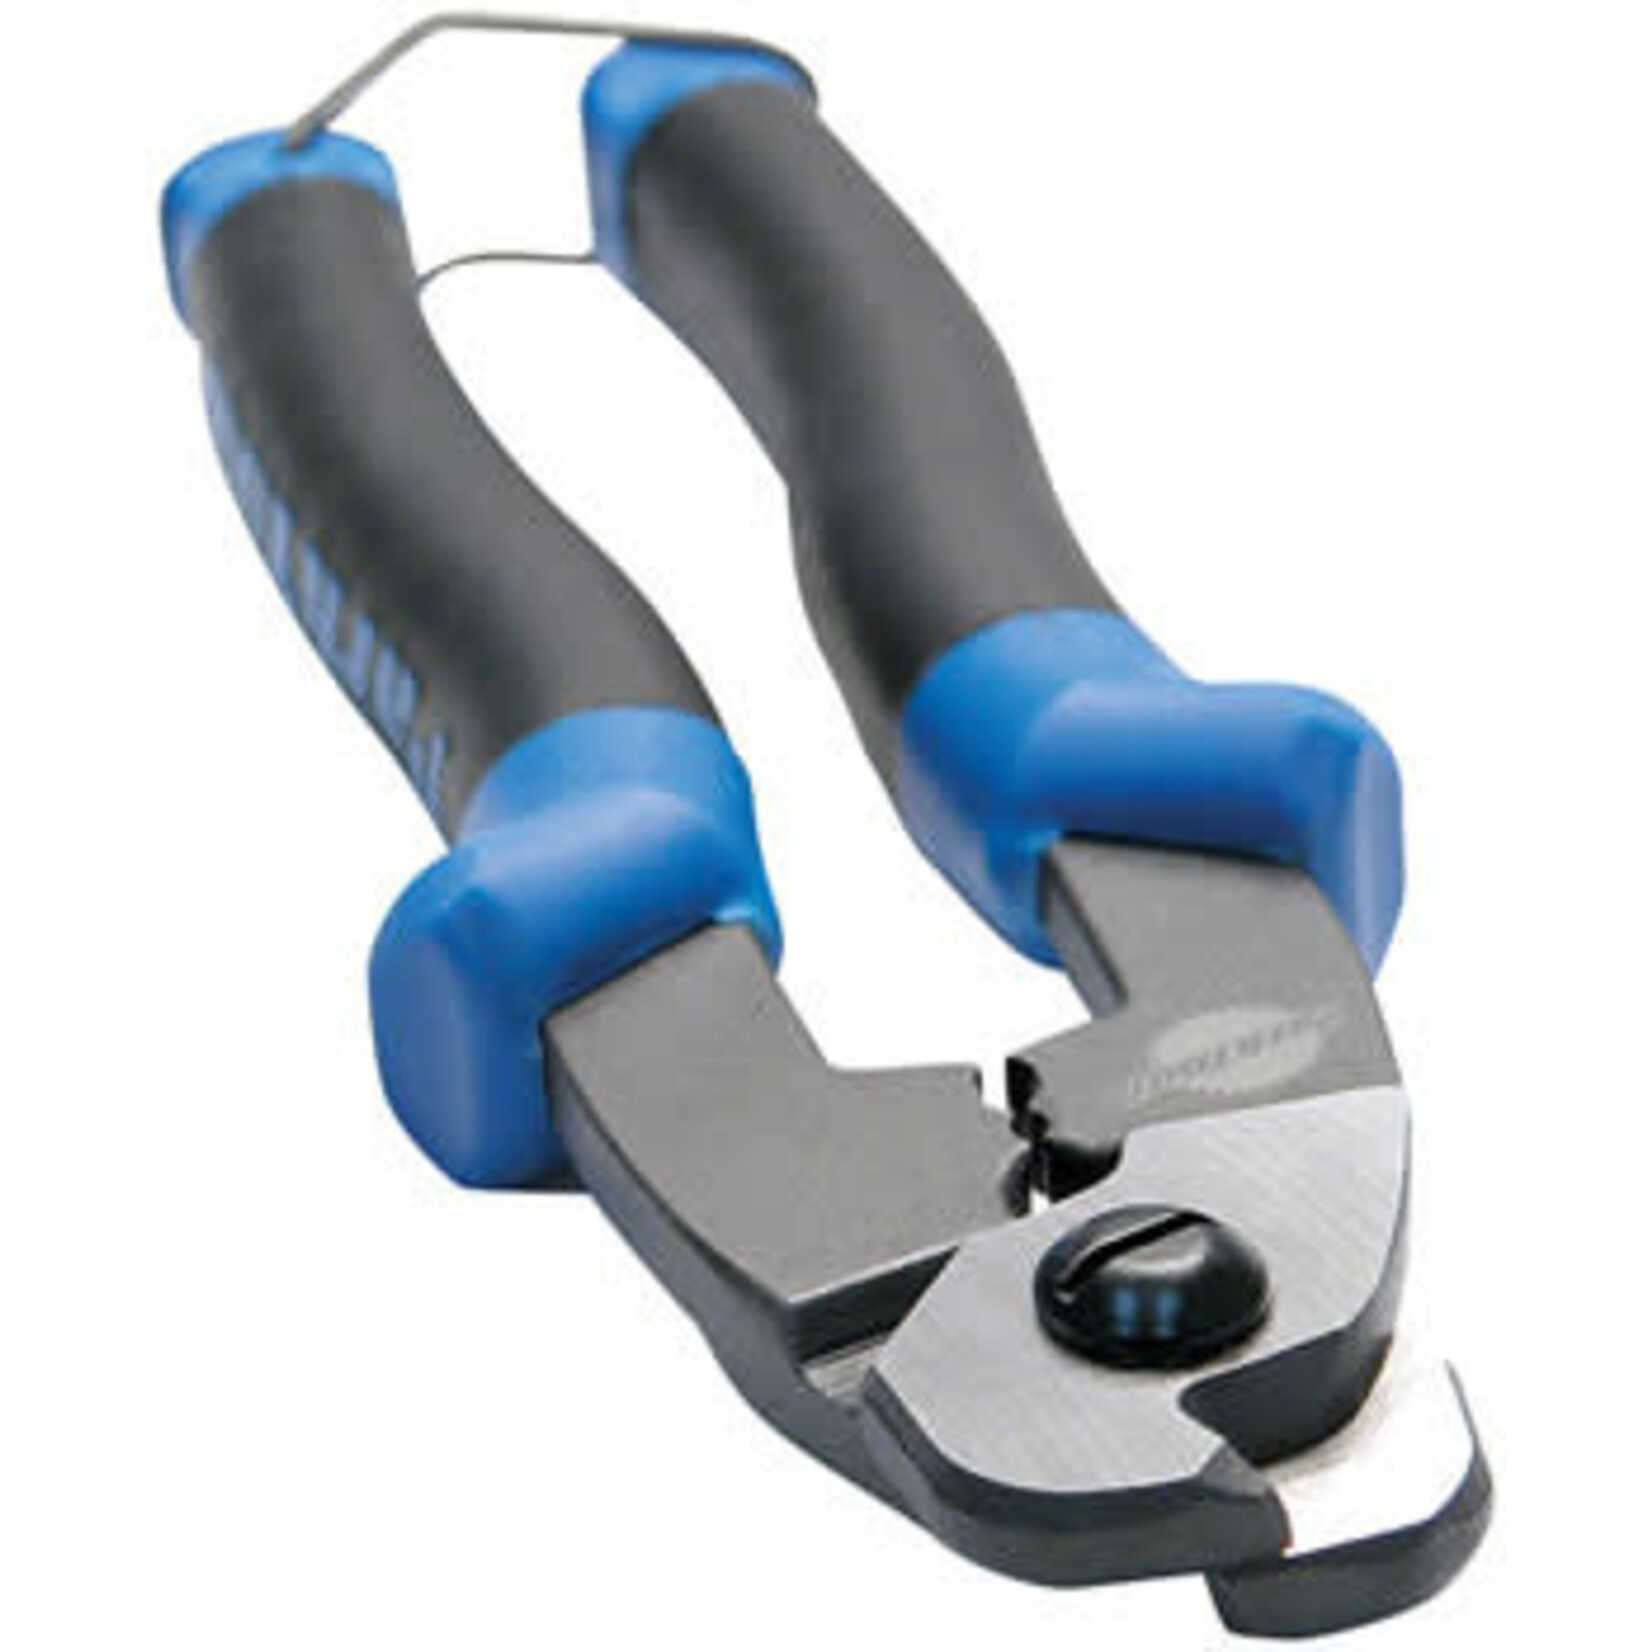 PARK TOOL Park tool - CN-10 Cable Cutter